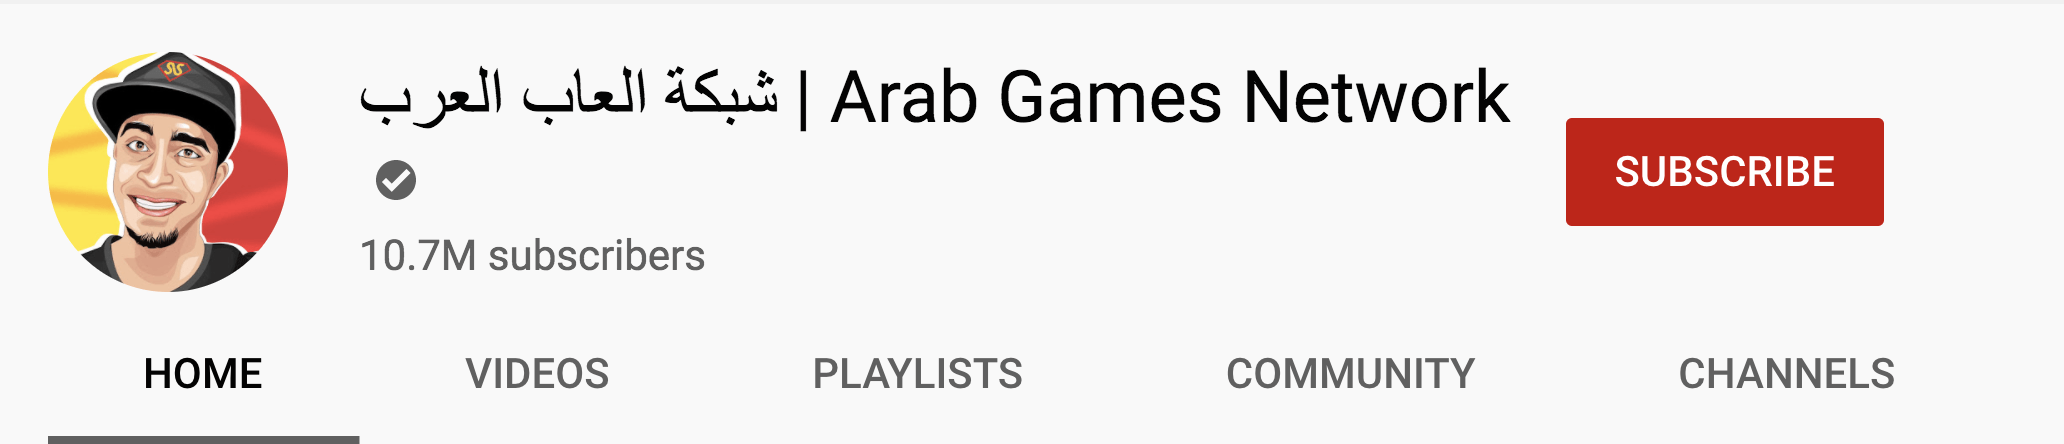 Top Youtube Gaming Influencers - Arab Games Network